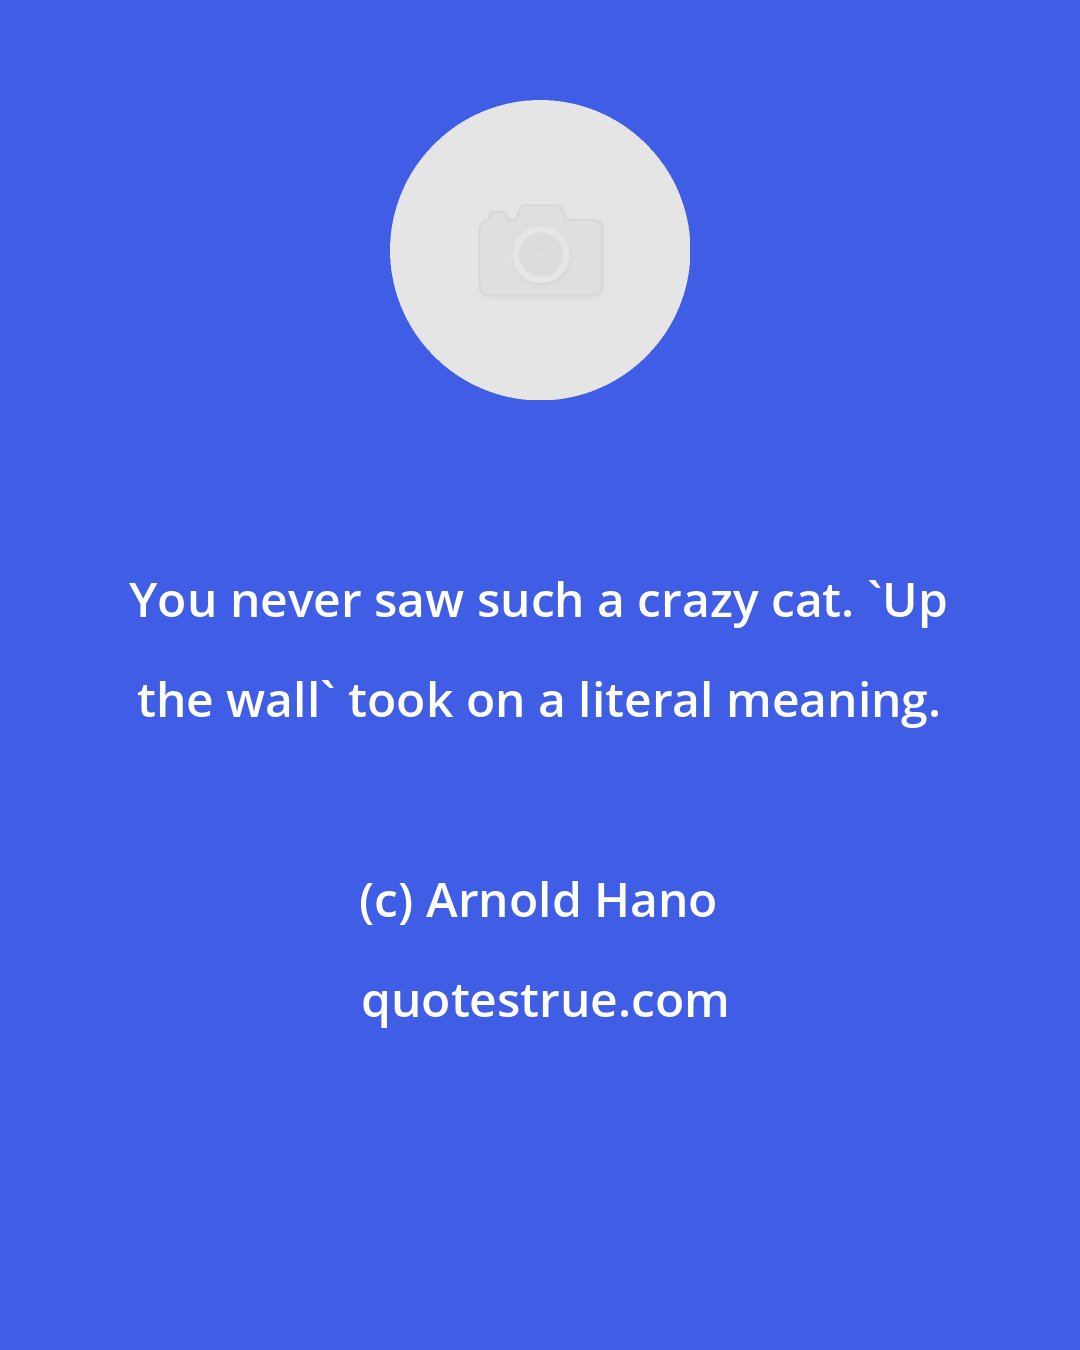 Arnold Hano: You never saw such a crazy cat. 'Up the wall' took on a literal meaning.